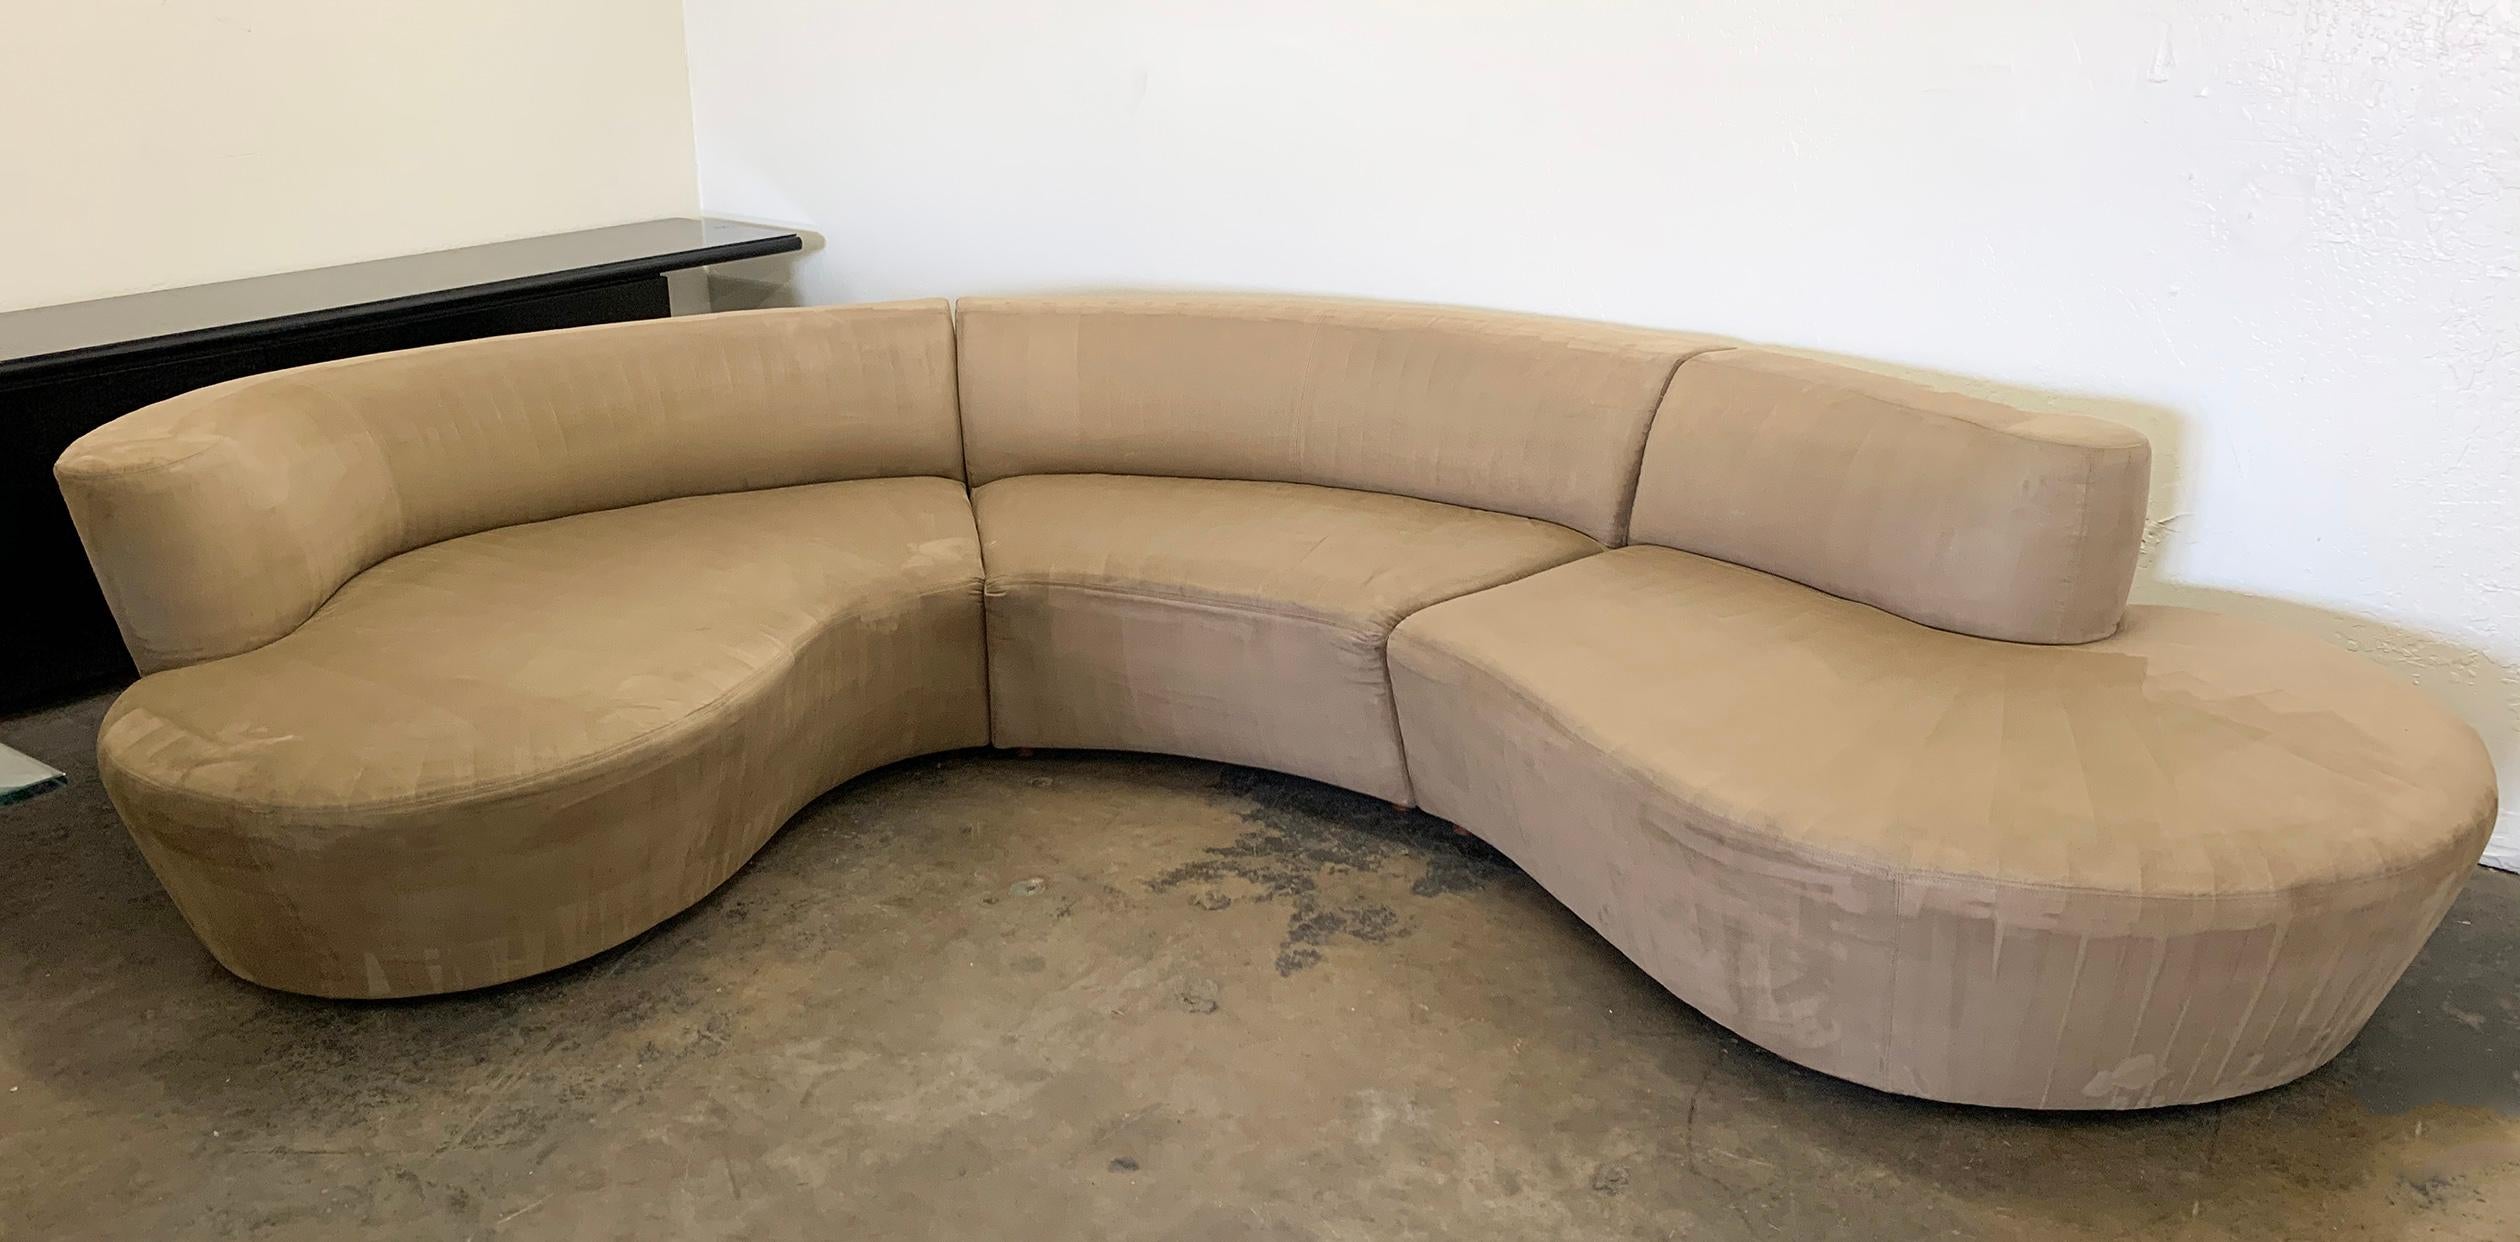 An absolutely gorgeous Vladimir Kagan serpentine sofa for Weiman. This three piece sectional is upholstered in a tan / taupe colored microsuede and is good condition with minimal wear consistent with age and use.

This sofa, like every other sofa